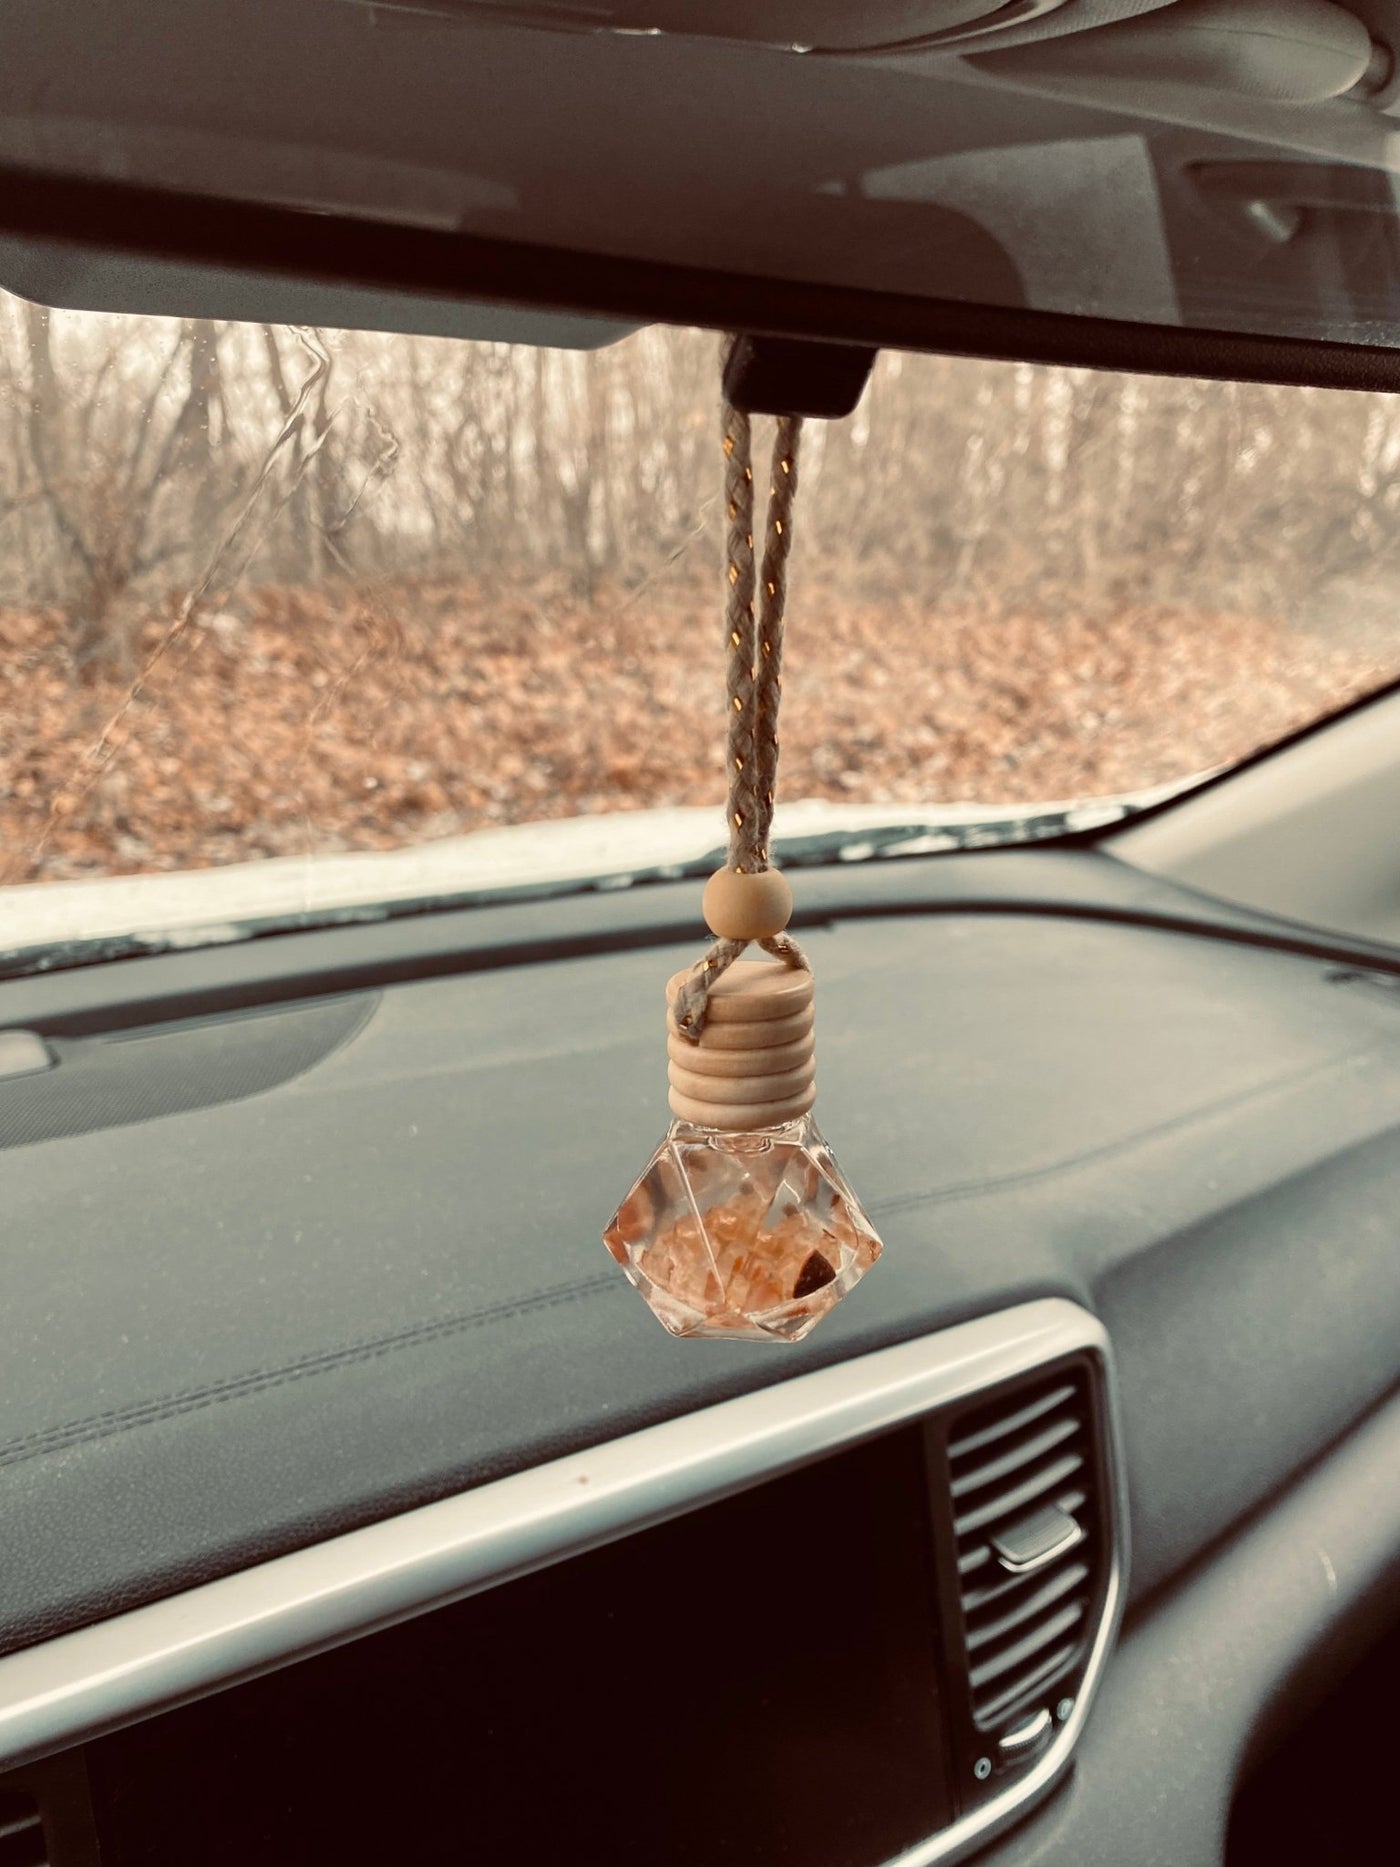 Car/Hanging Diffuser (NEW larger refill bottle size!)